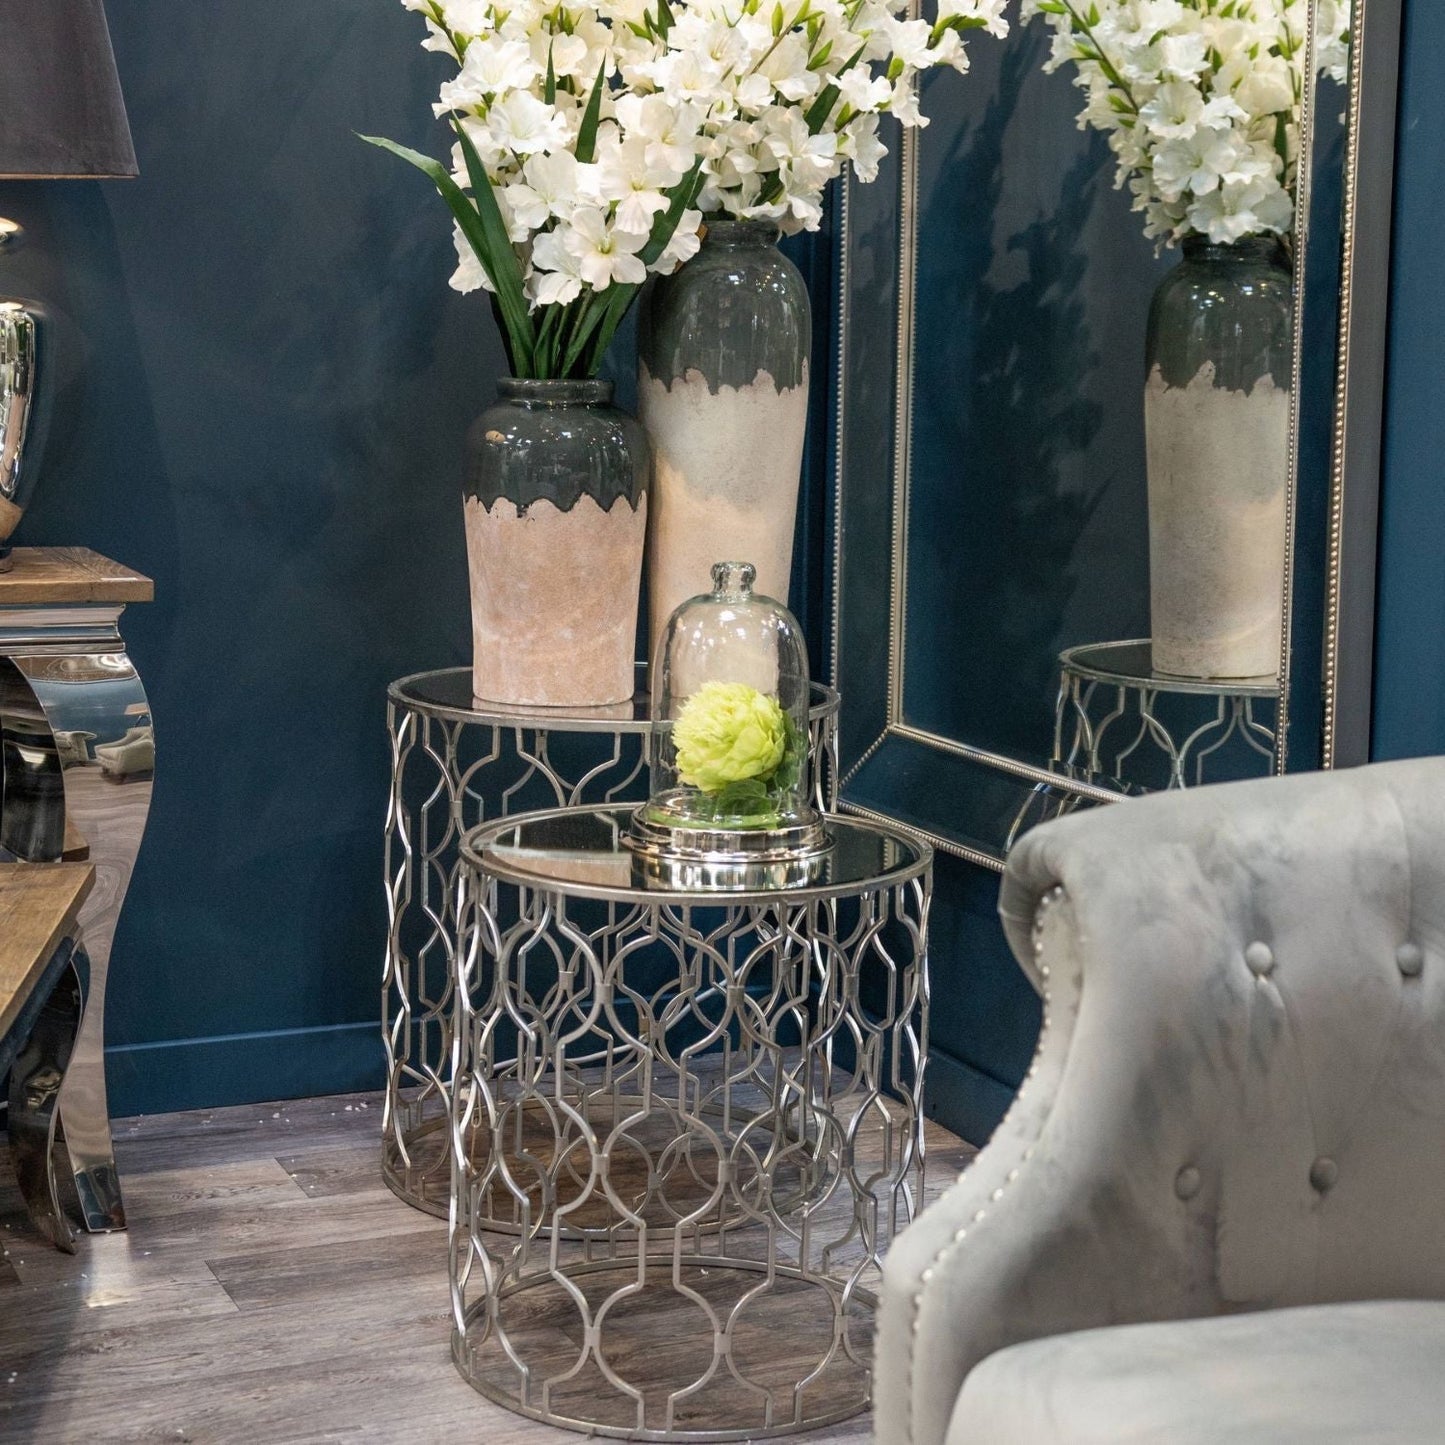 Pair of silver side tables with an ornate frame